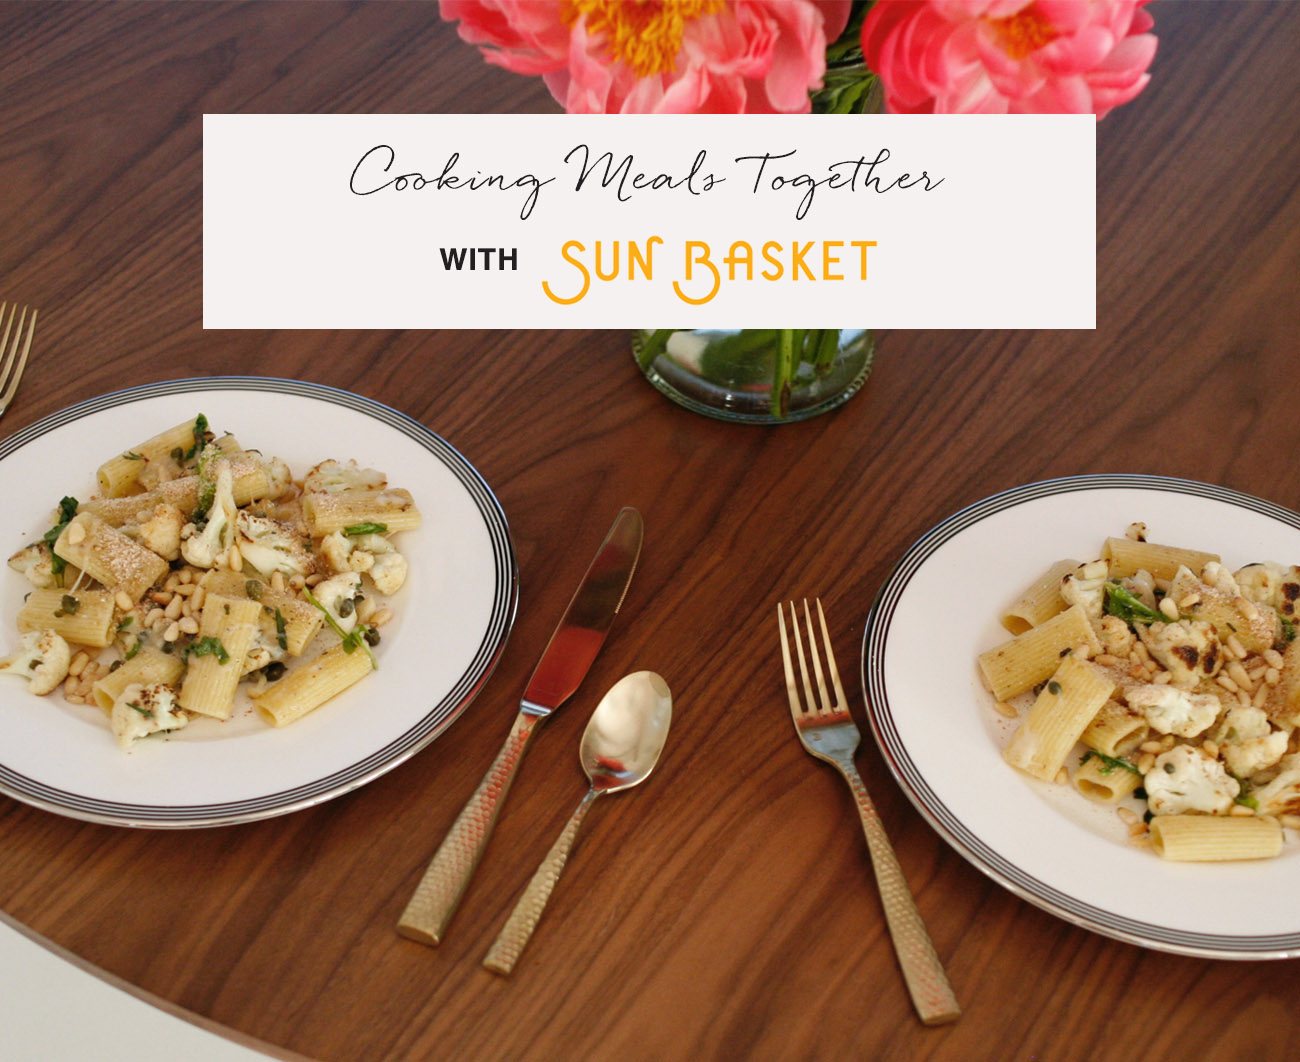 Cooking Meals Together with Sun Basket